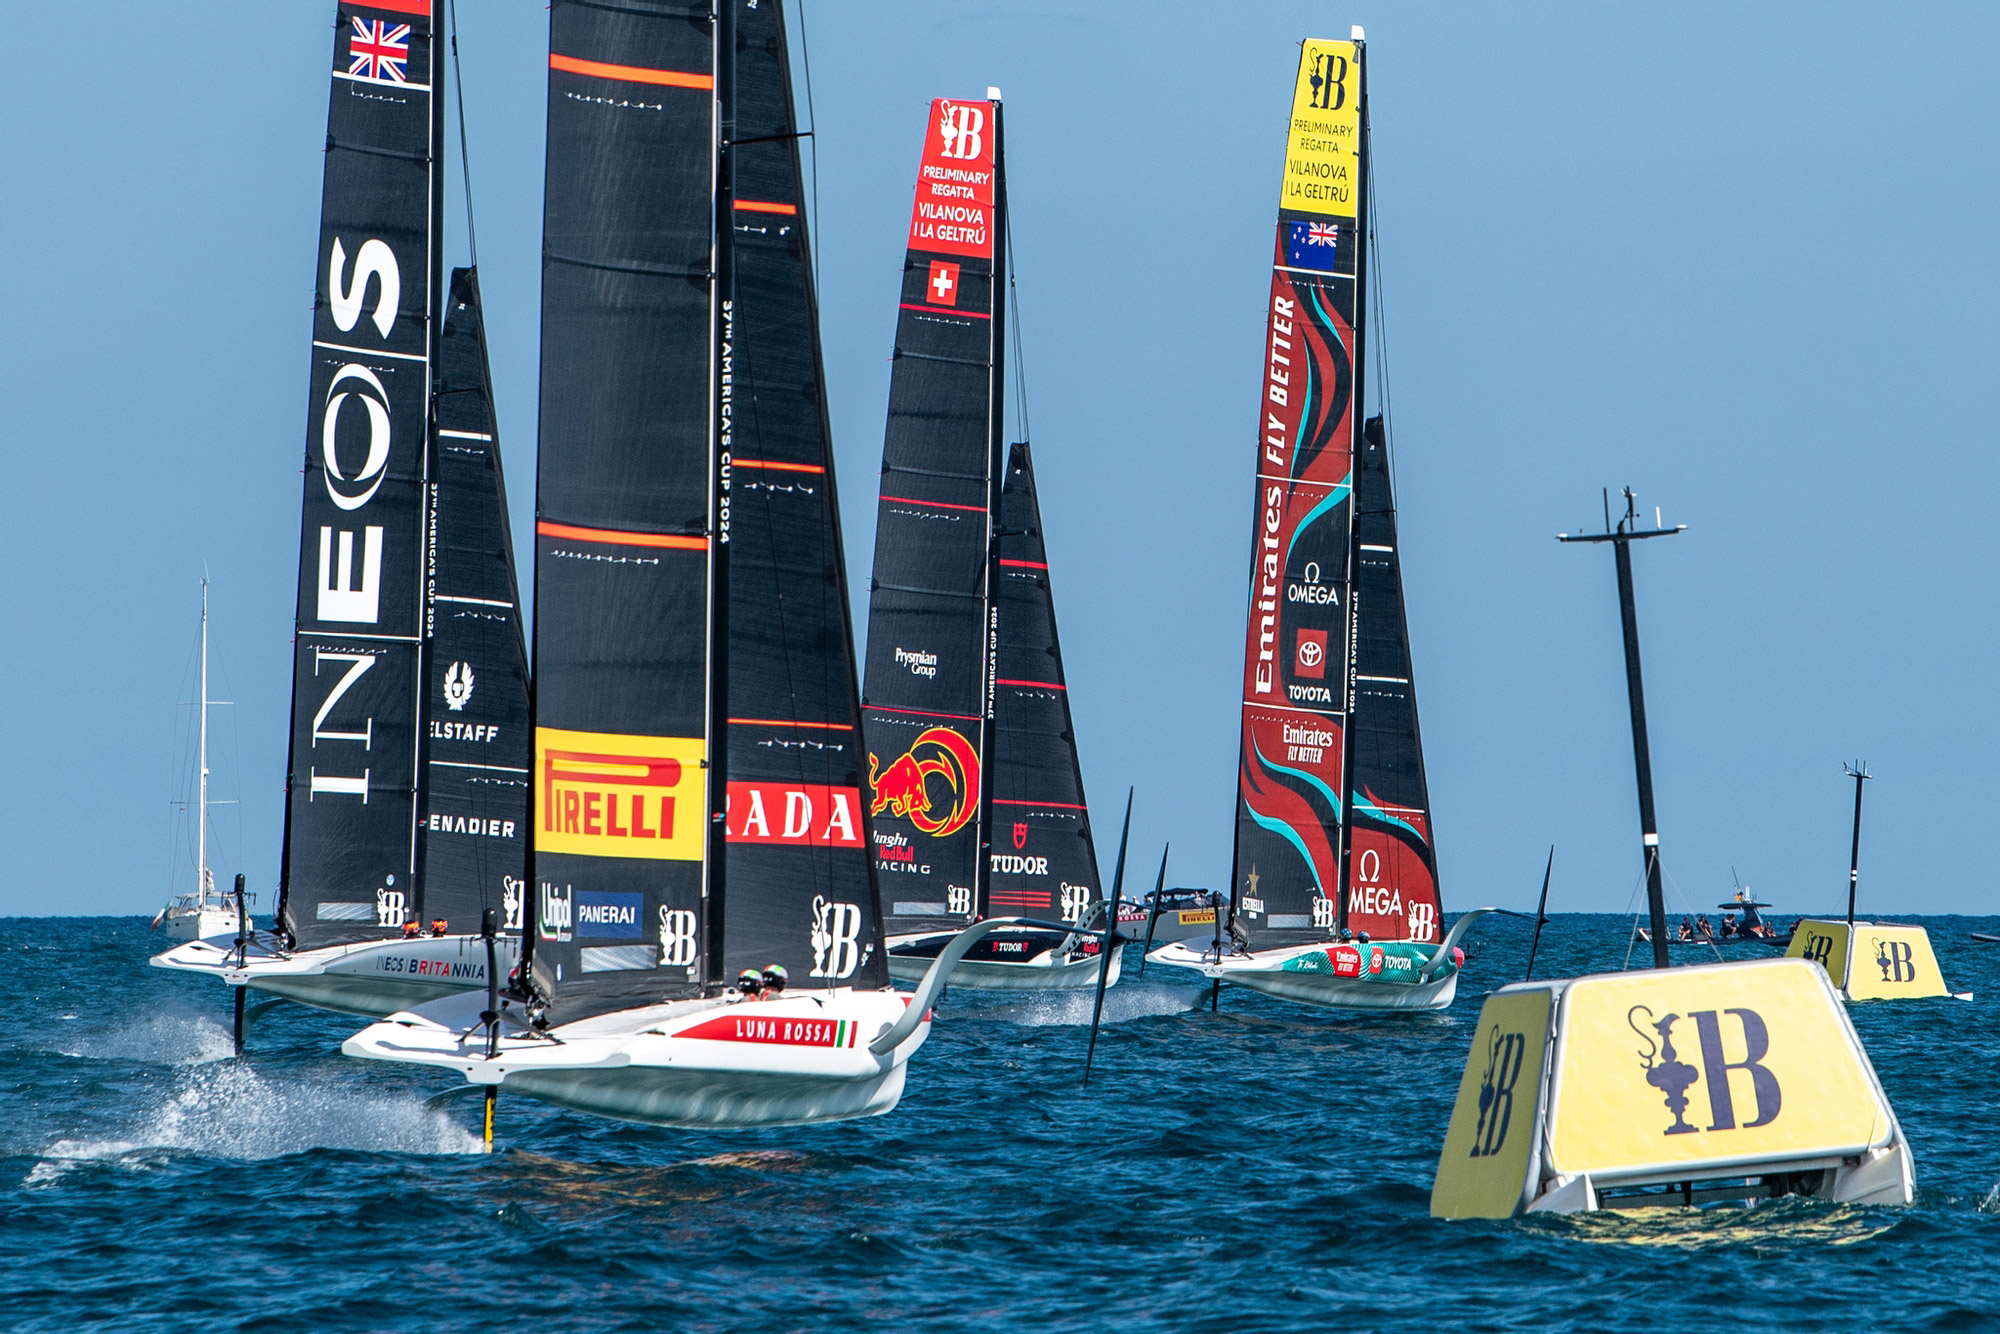 Barcelona Boat Show and the one year countdown to the America’s Cup 2024